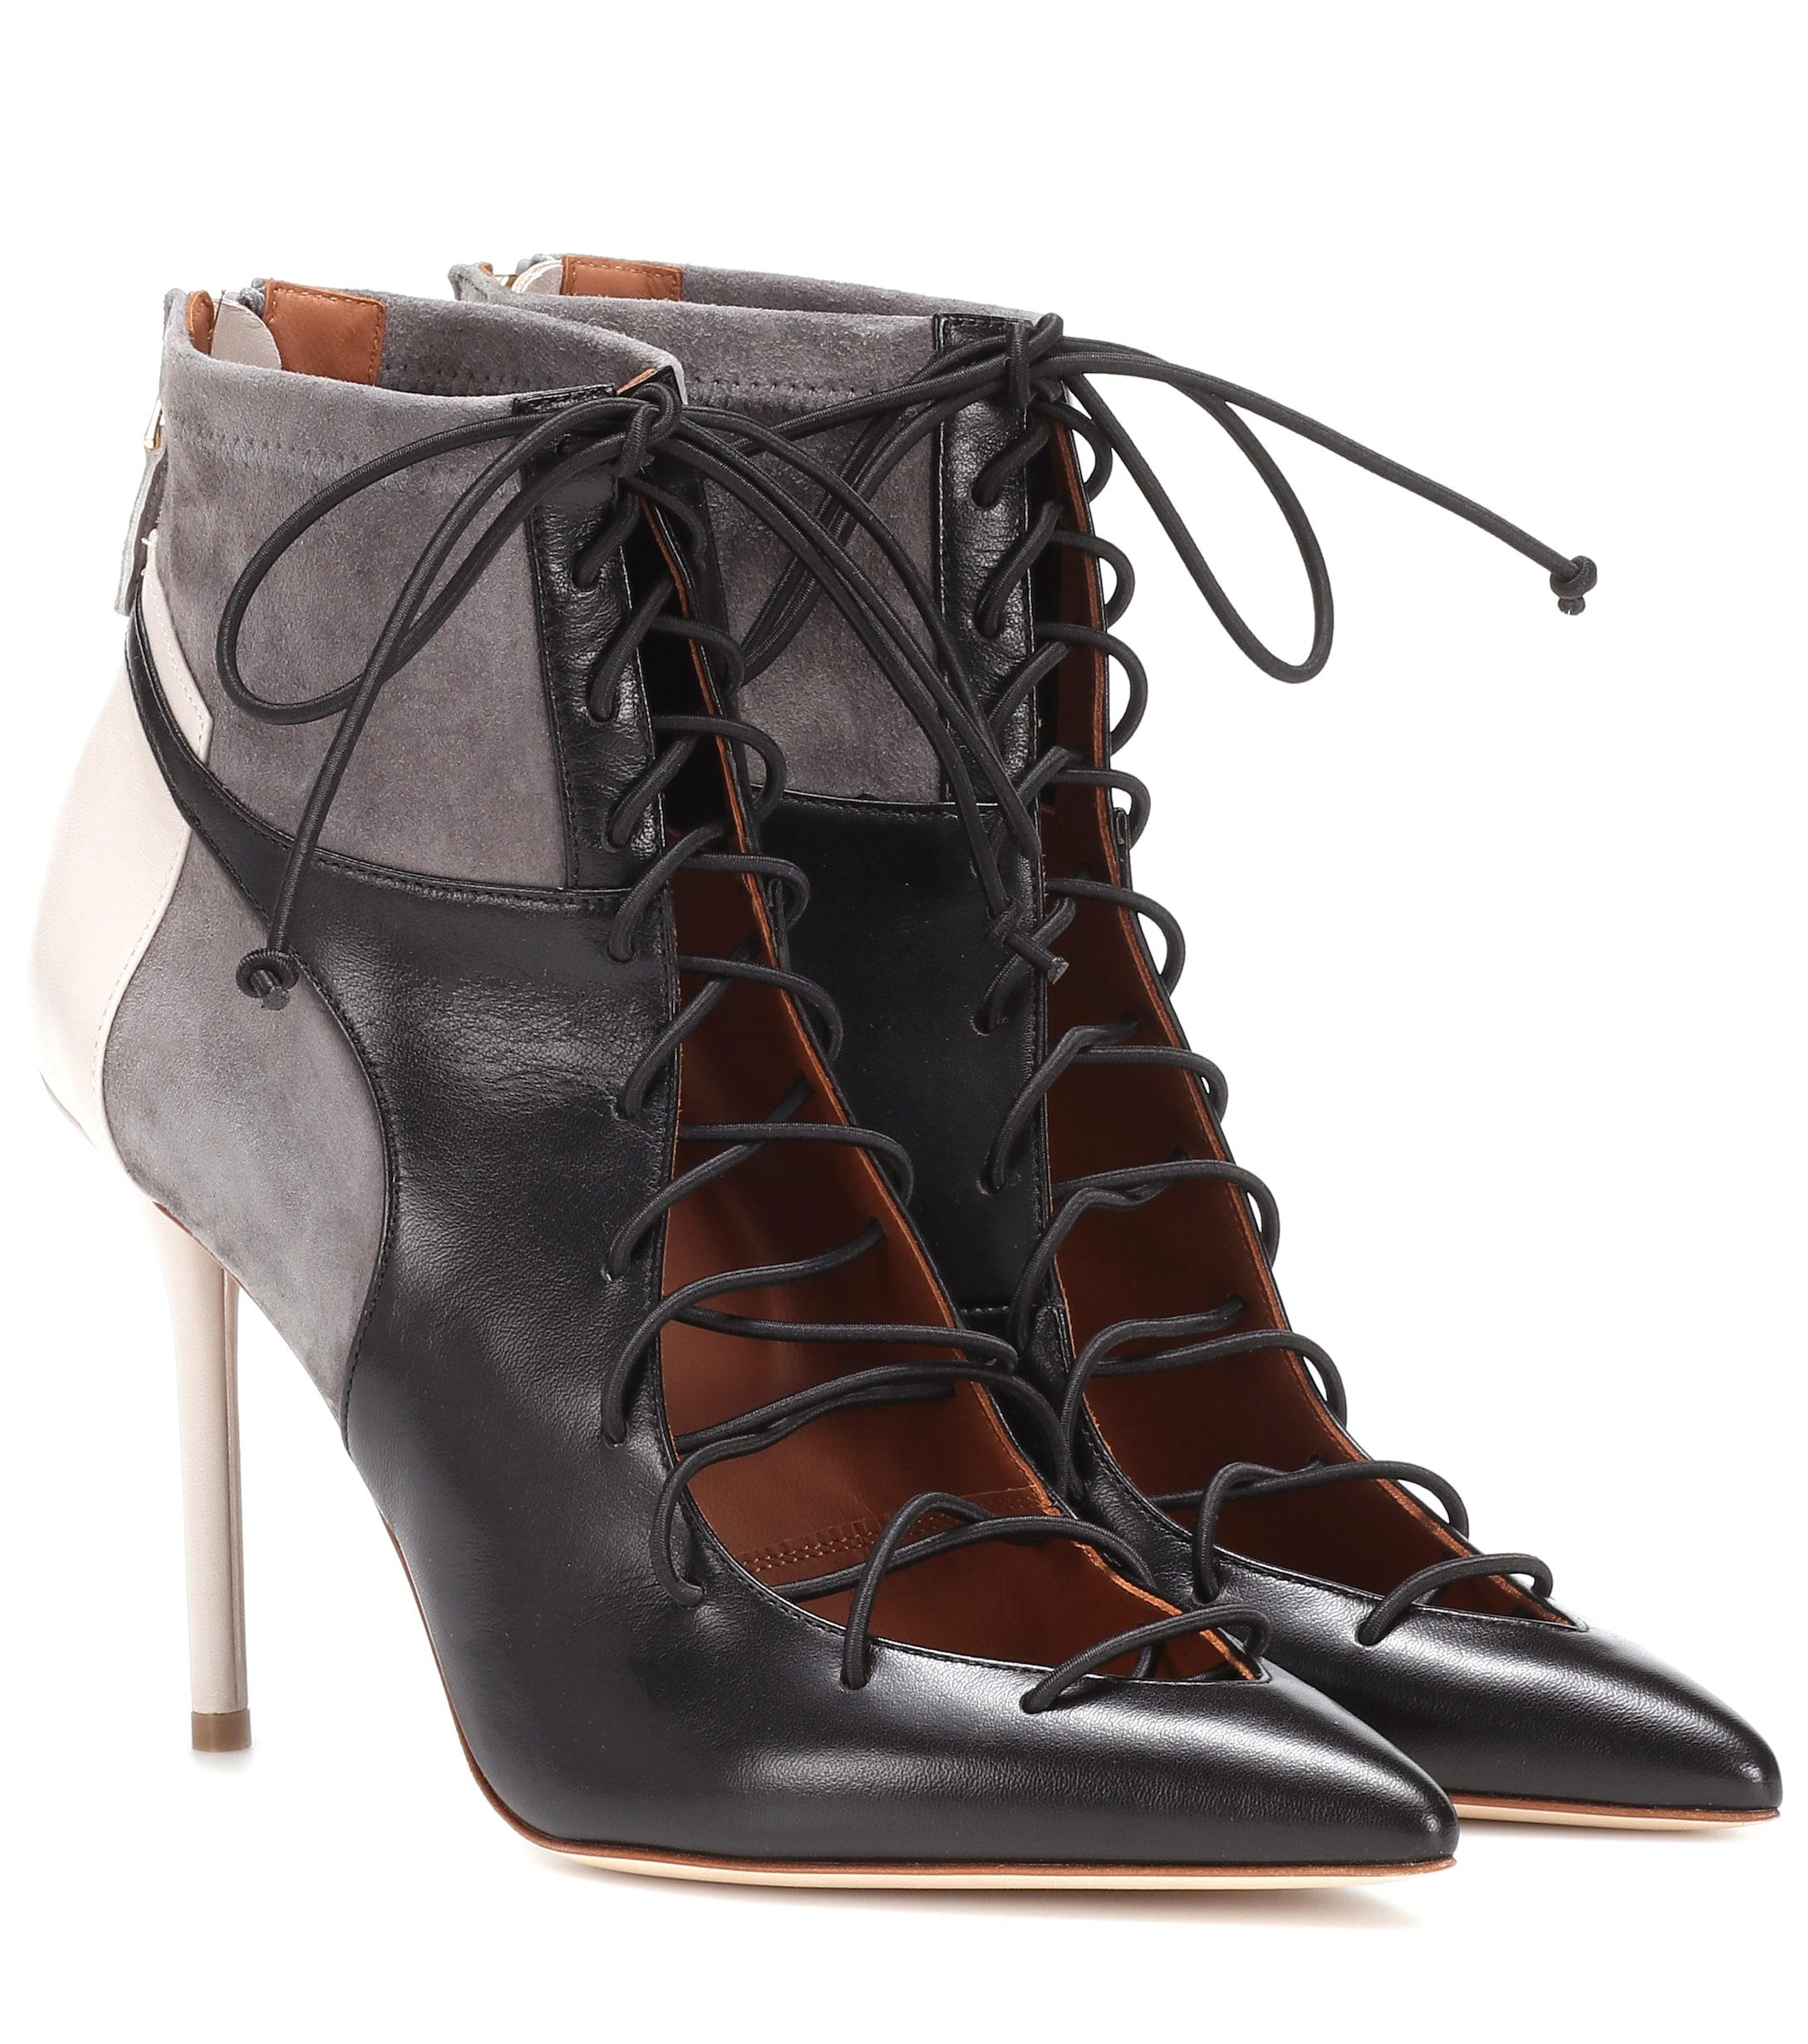 Malone Souliers Montana 100 Leather Ankle Boots in Black - Lyst